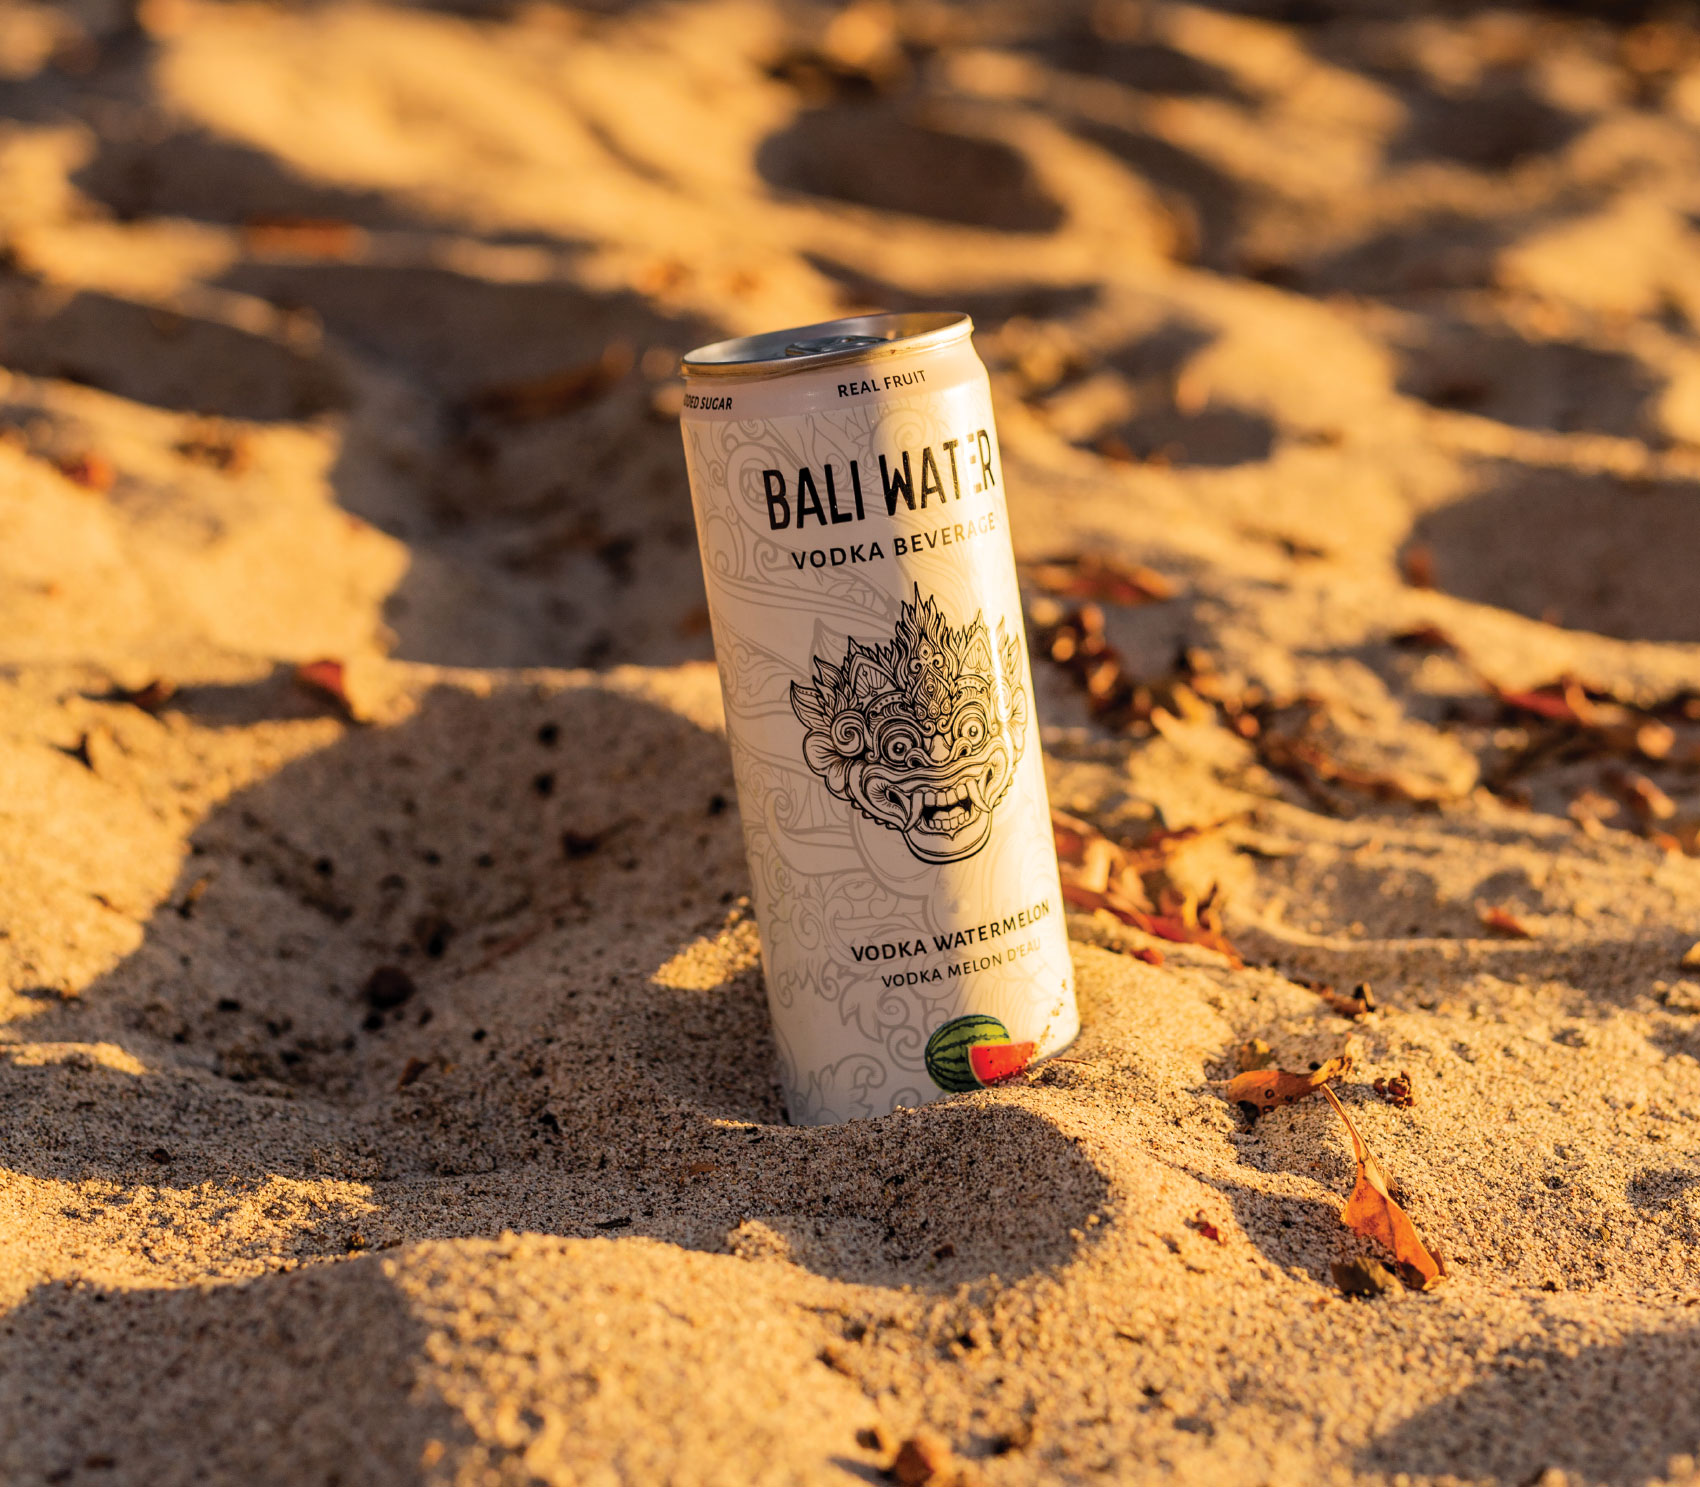 Can of Bali Water Vodka Beverage sitting in the sand